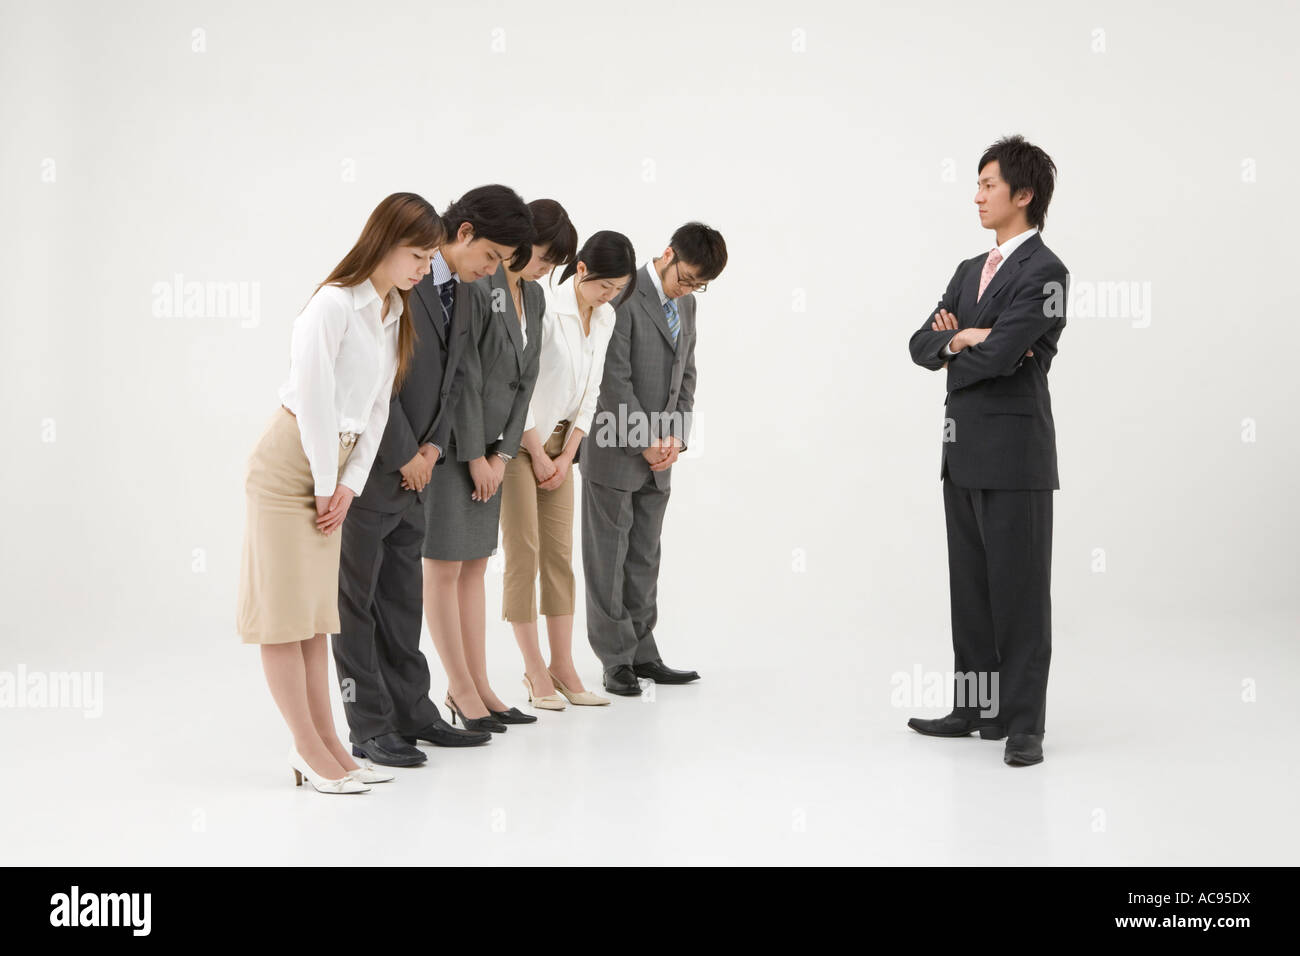 Business people bowing to businessman Stock Photo